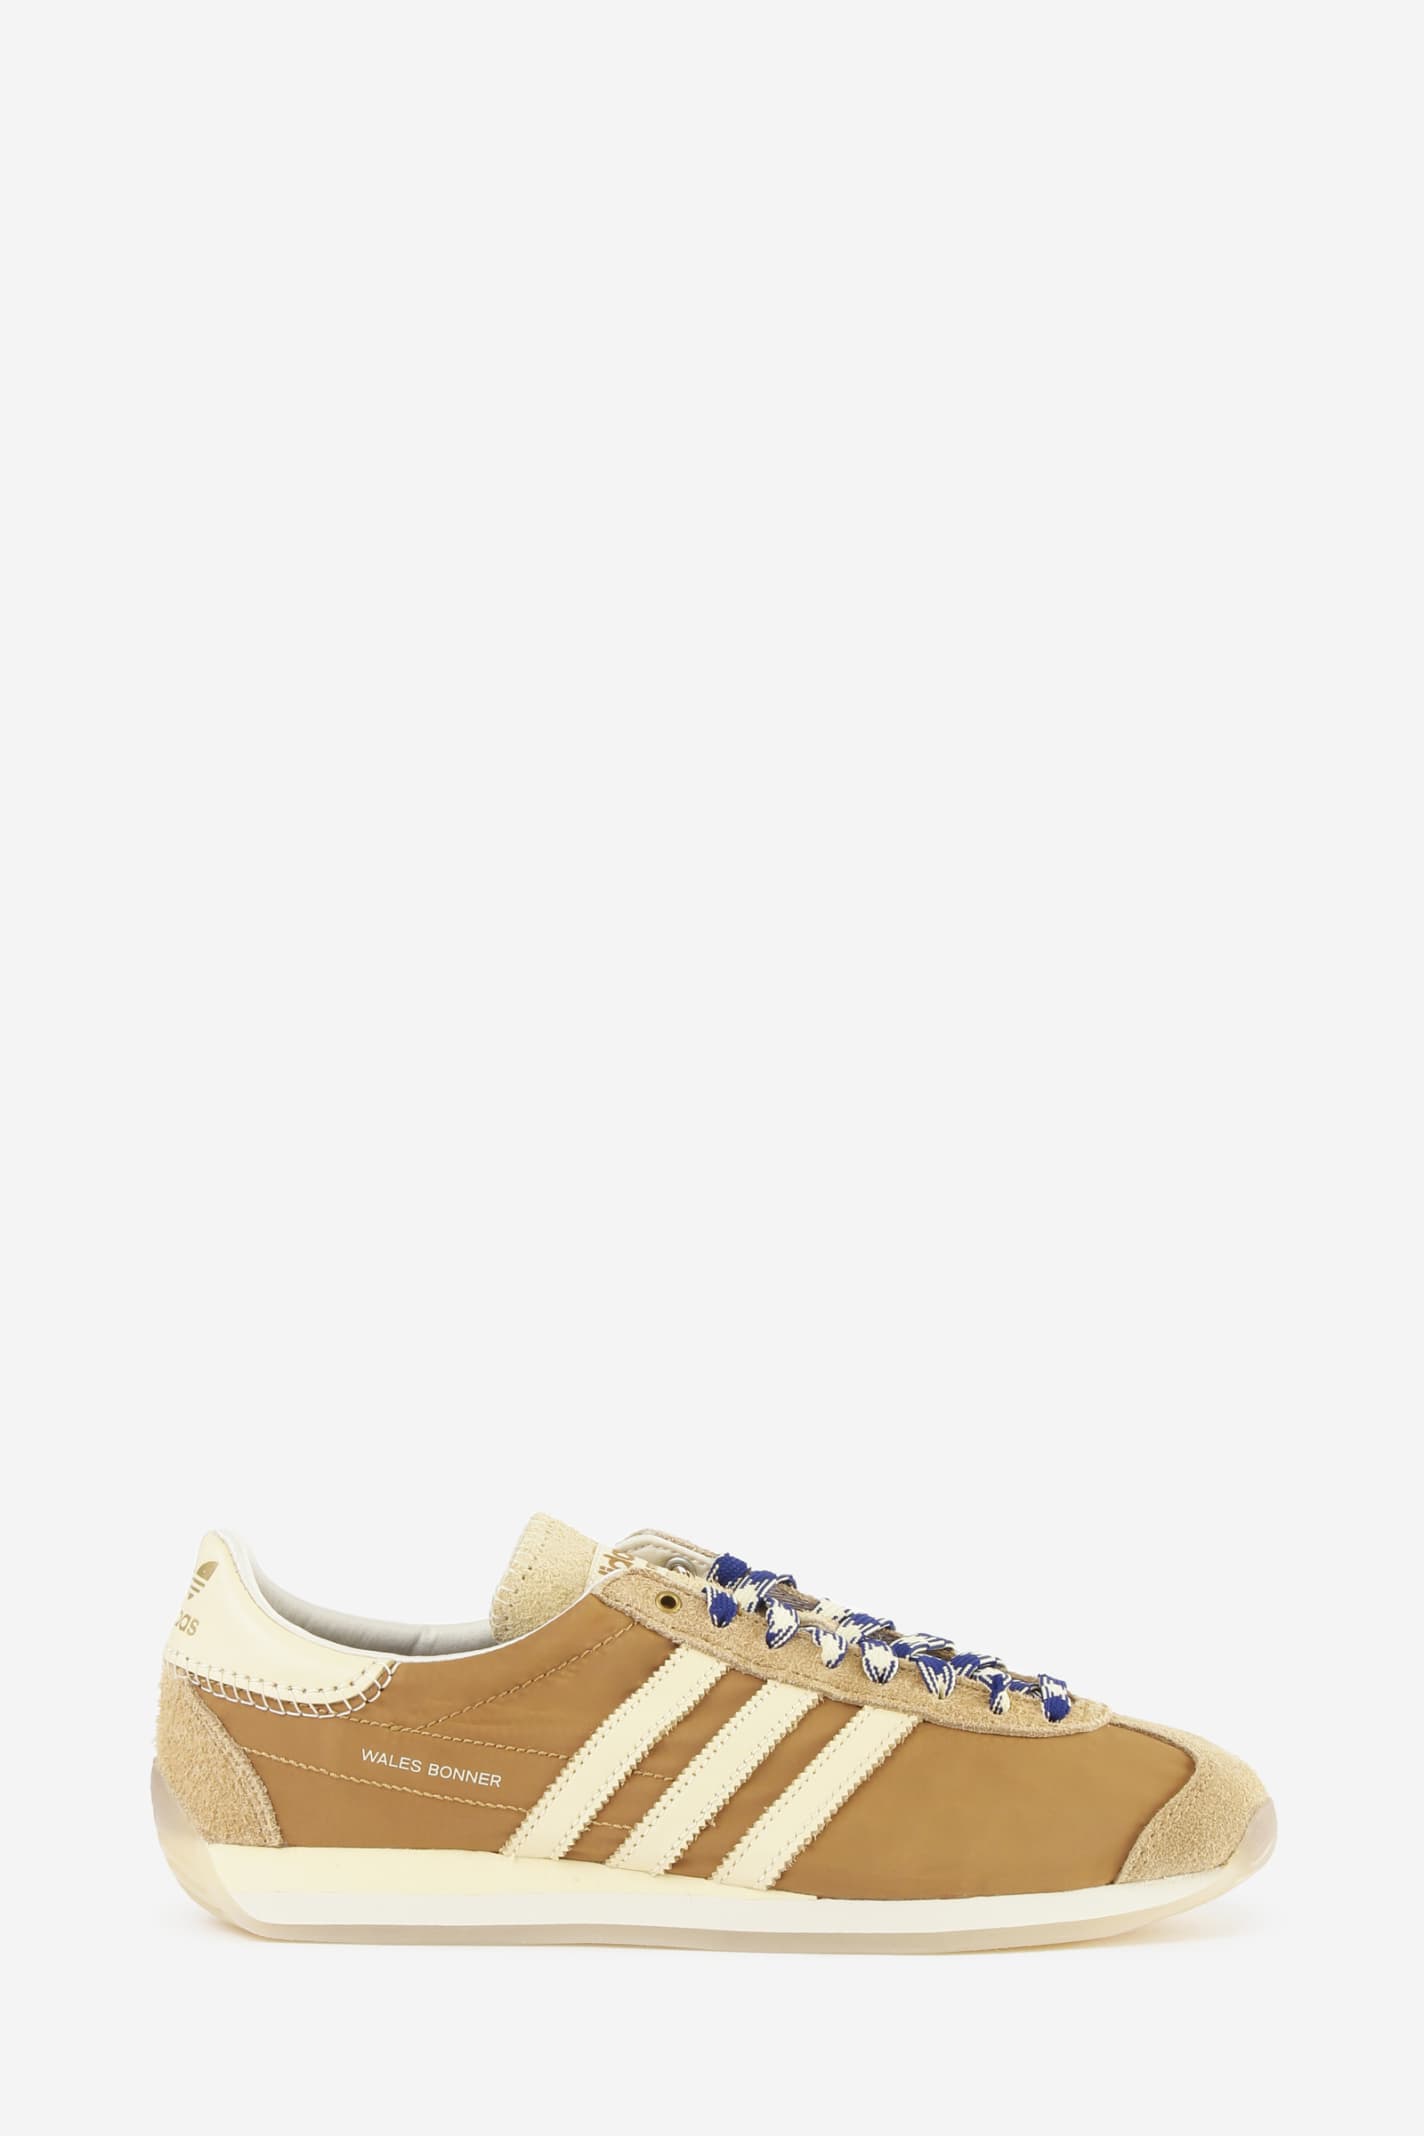 Adidas Originals by Wales Bonner Adidas X Wales Bonner Wb Country Sneakers